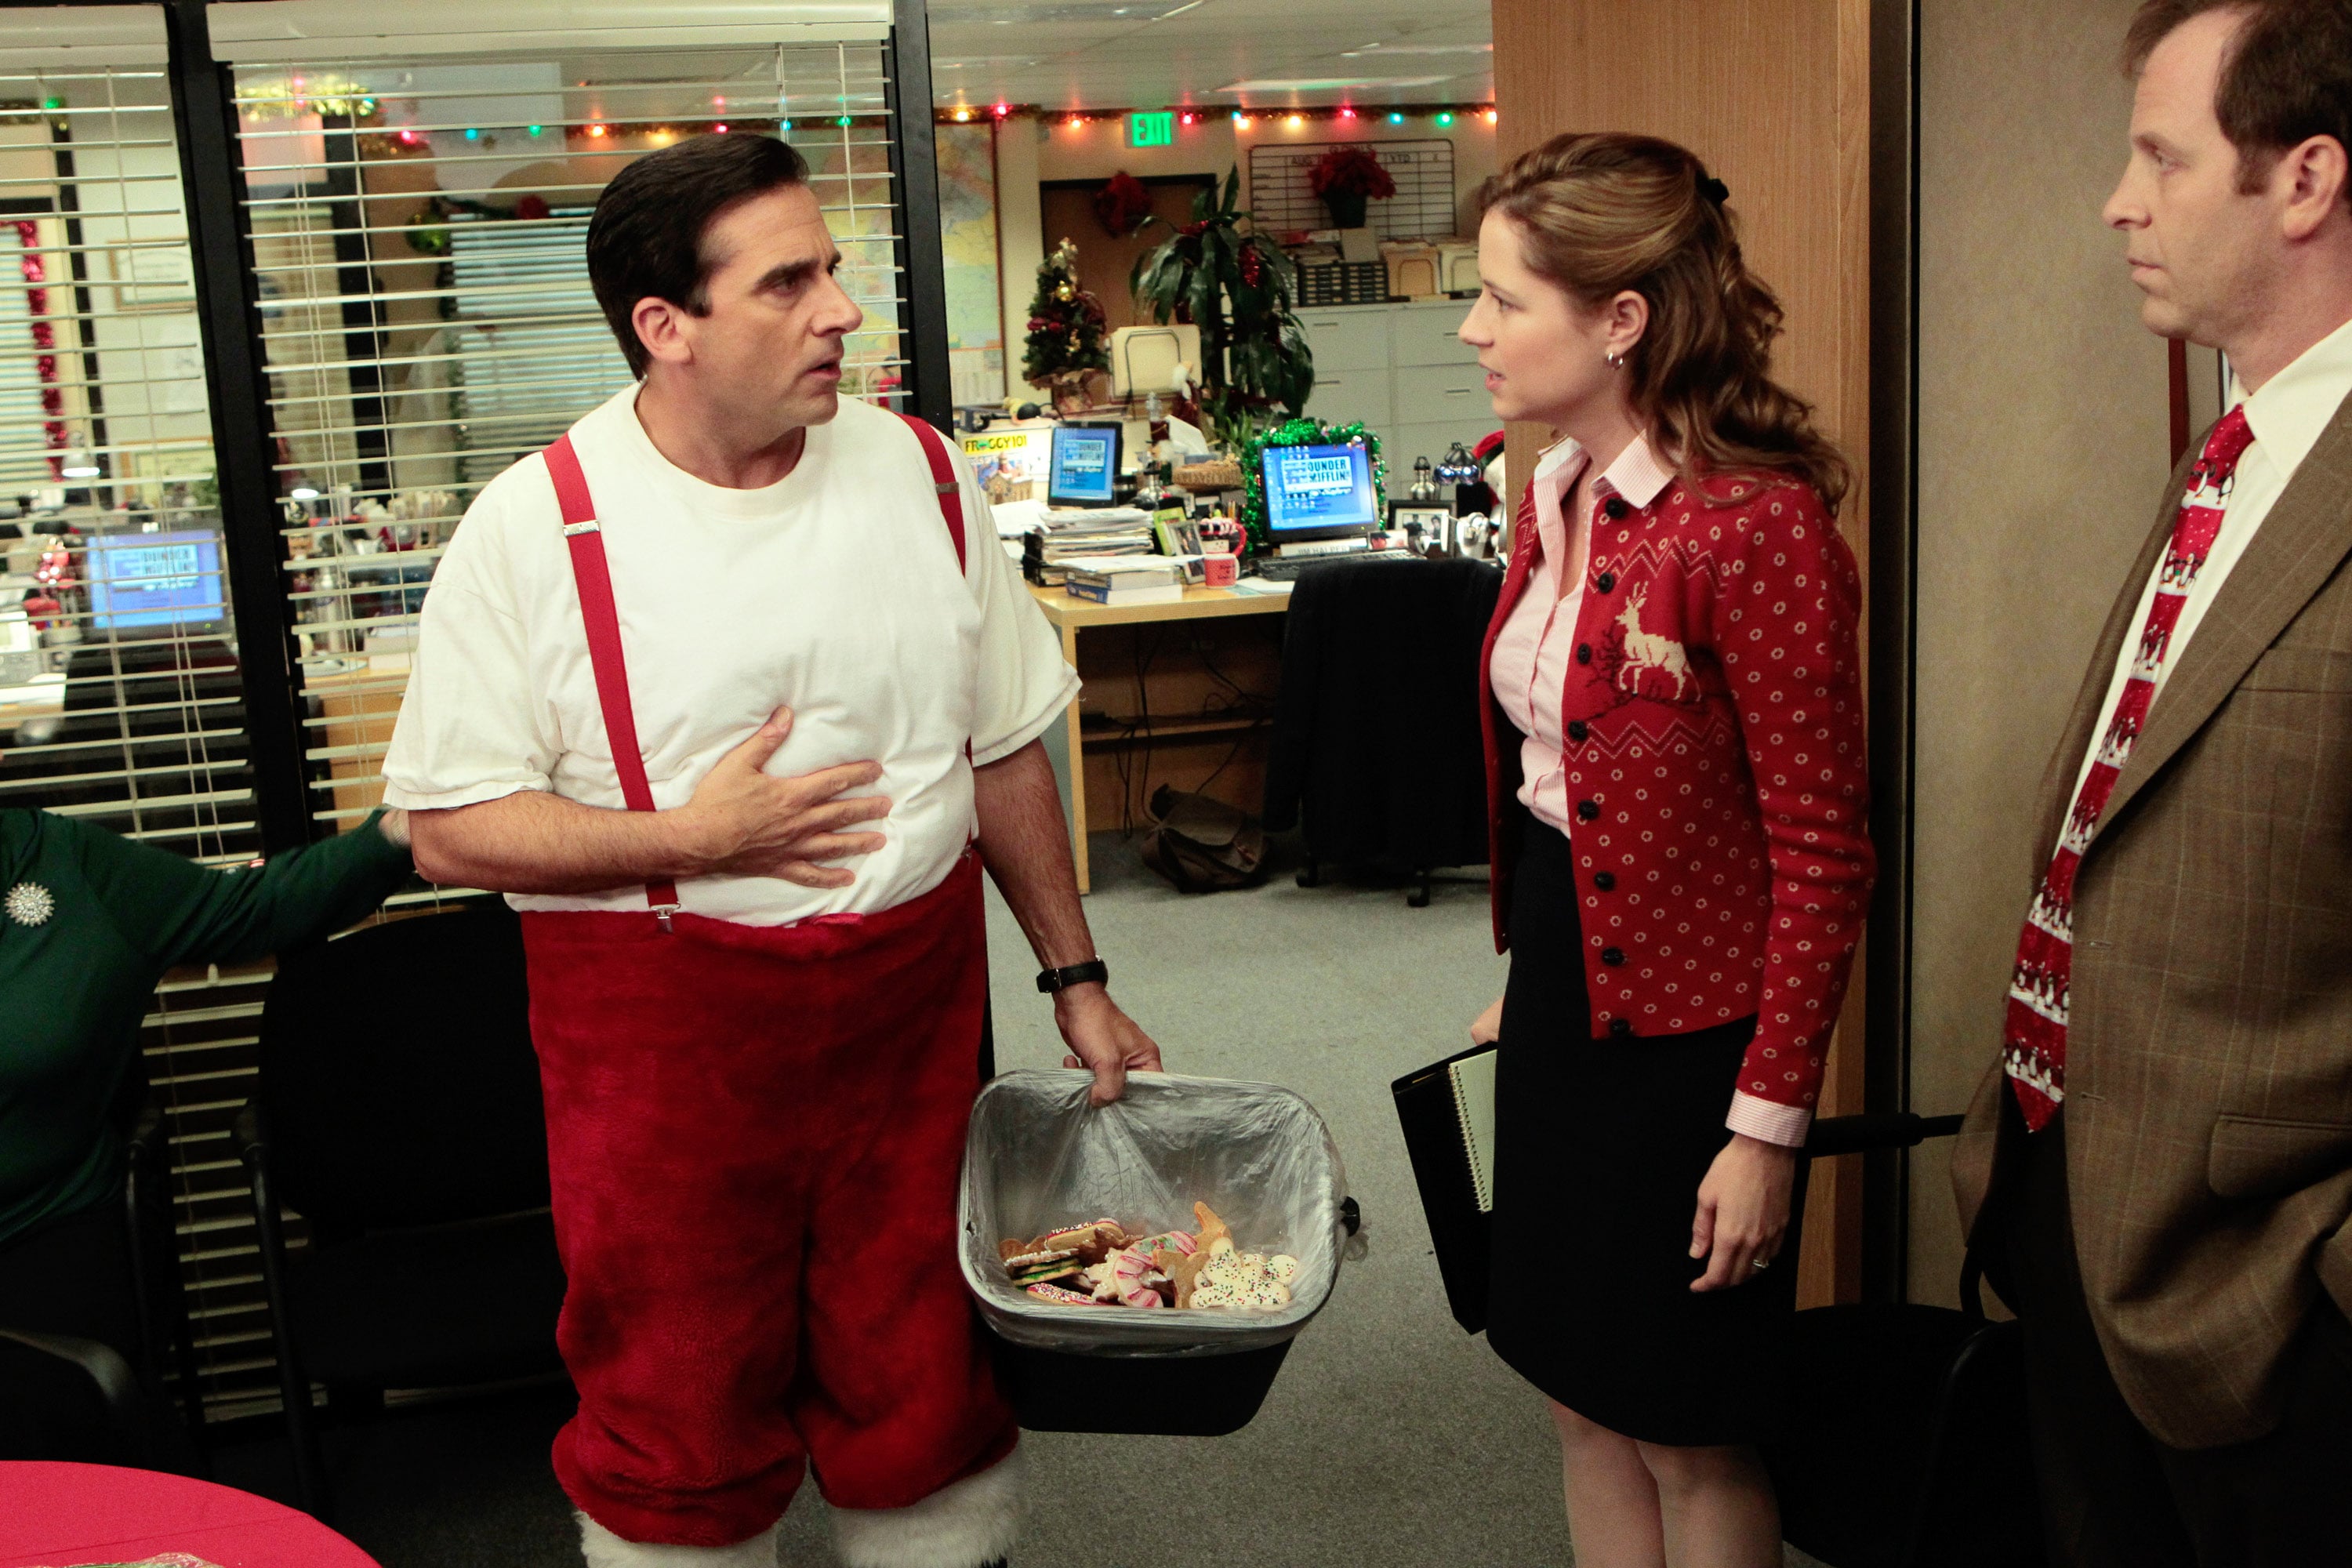 All The Office Christmas Episodes Listed In Order